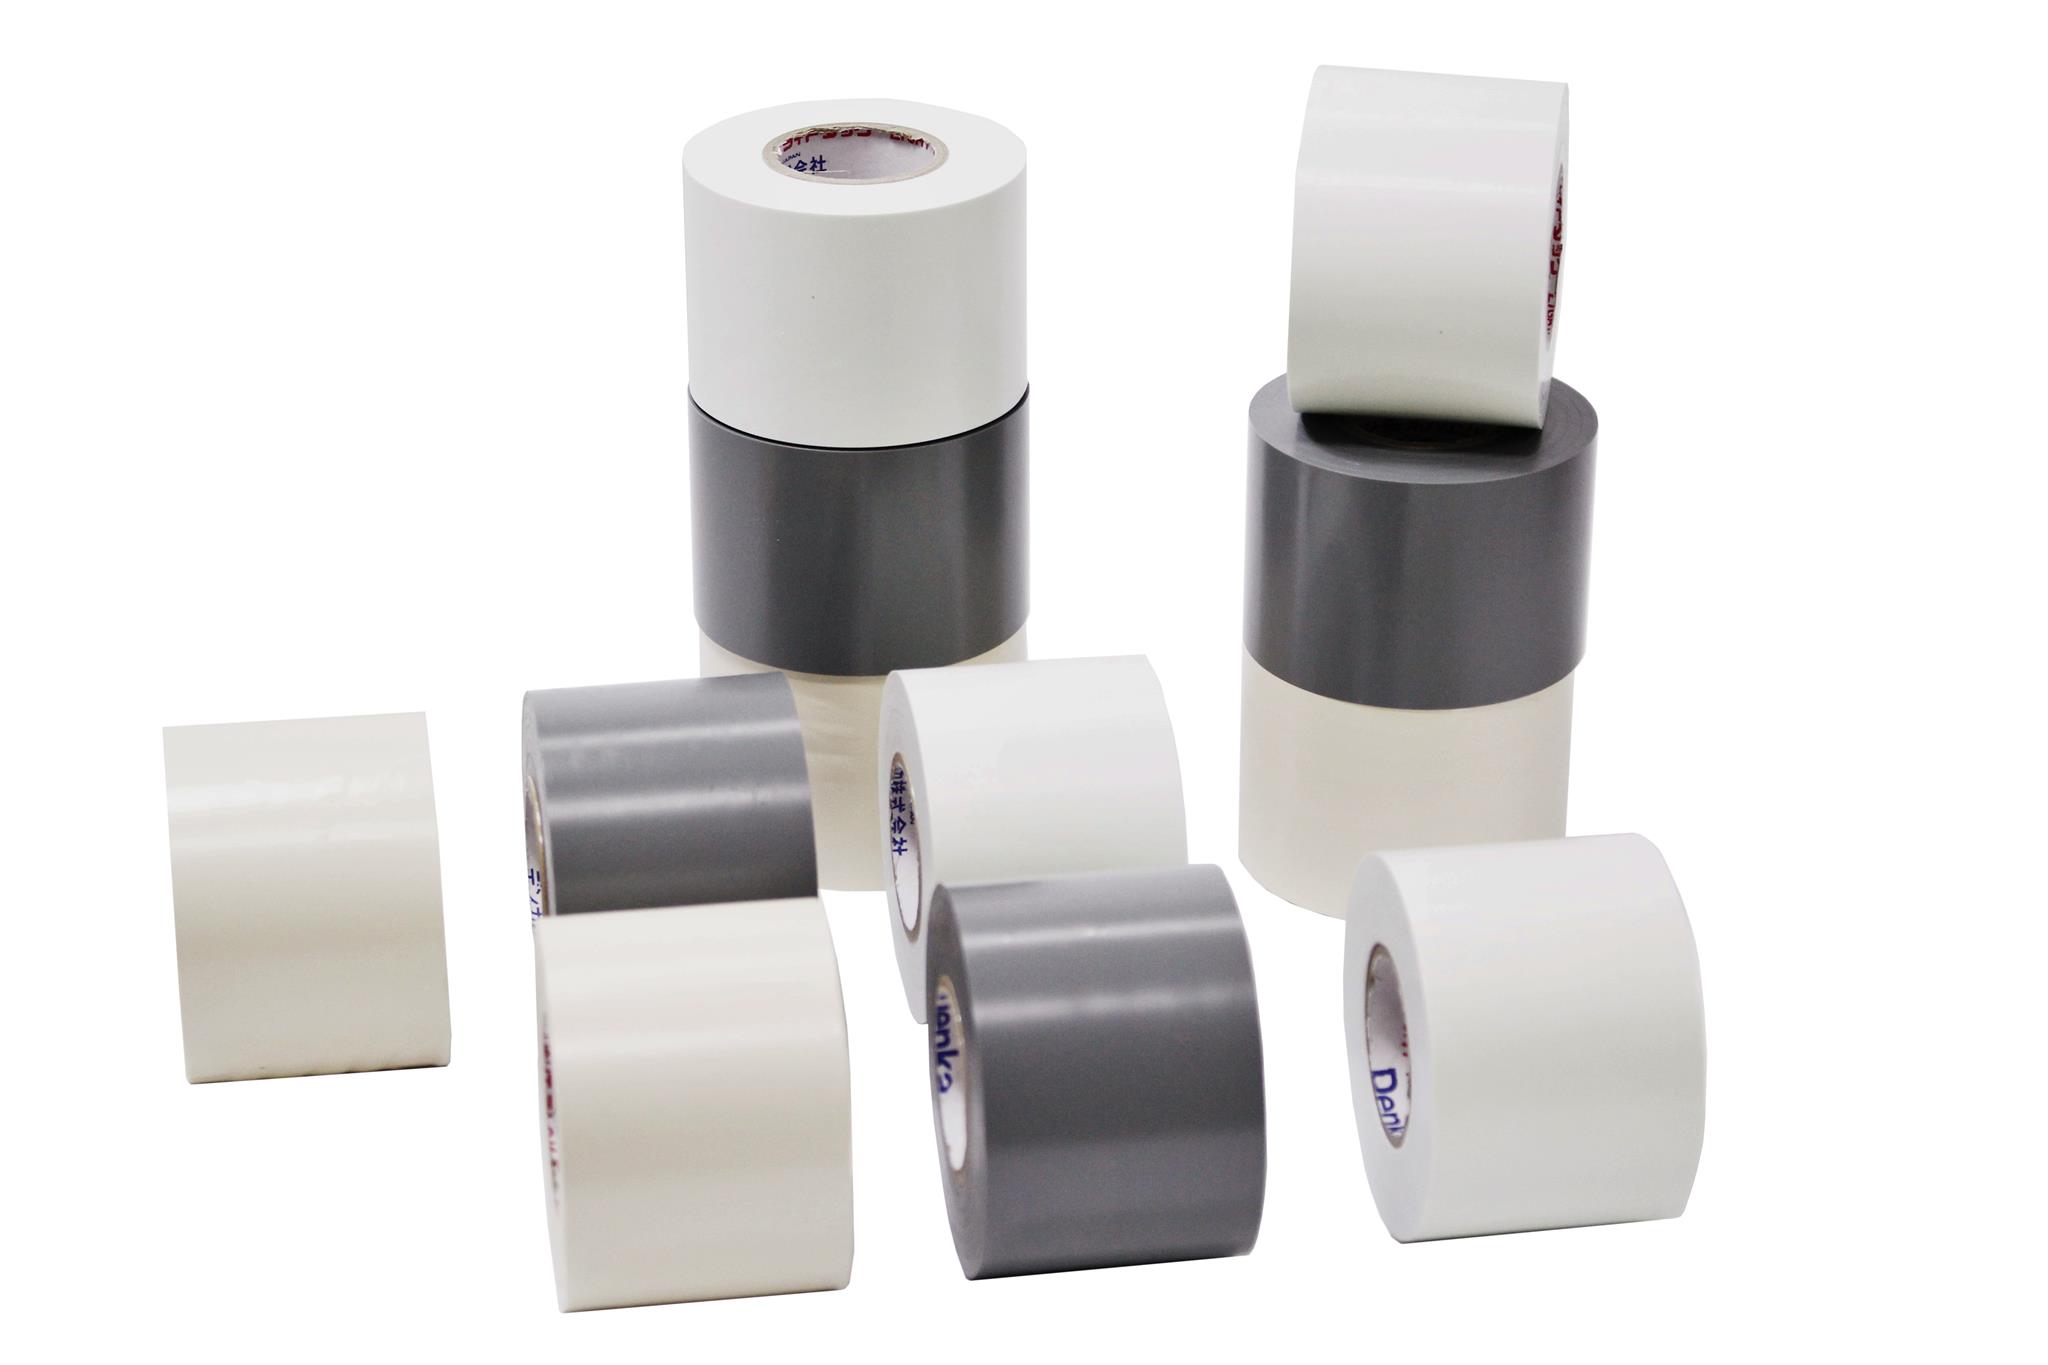 Vinyl tape for air conditioning ducts be not fallen apart (non-adhesive tape)